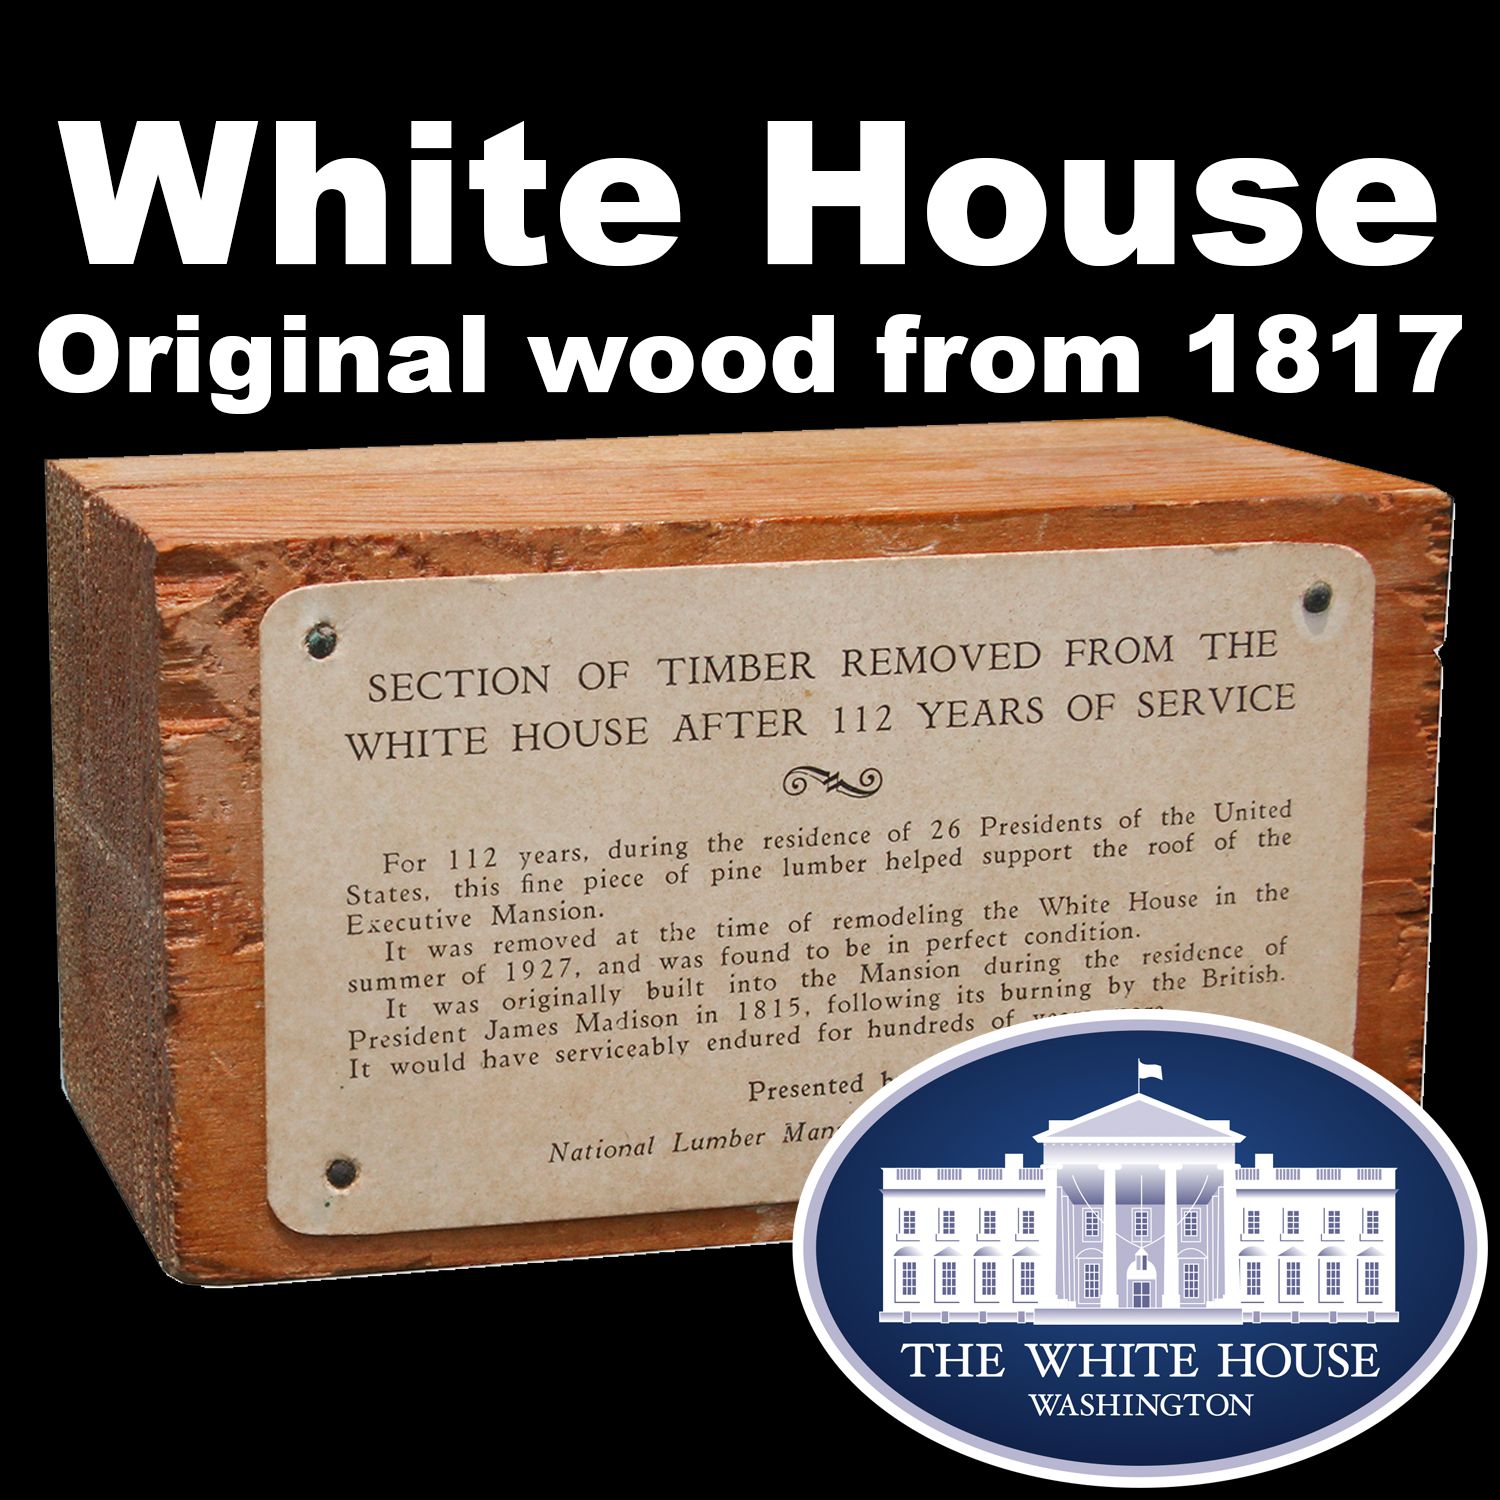 White House 1927 Web Image.png